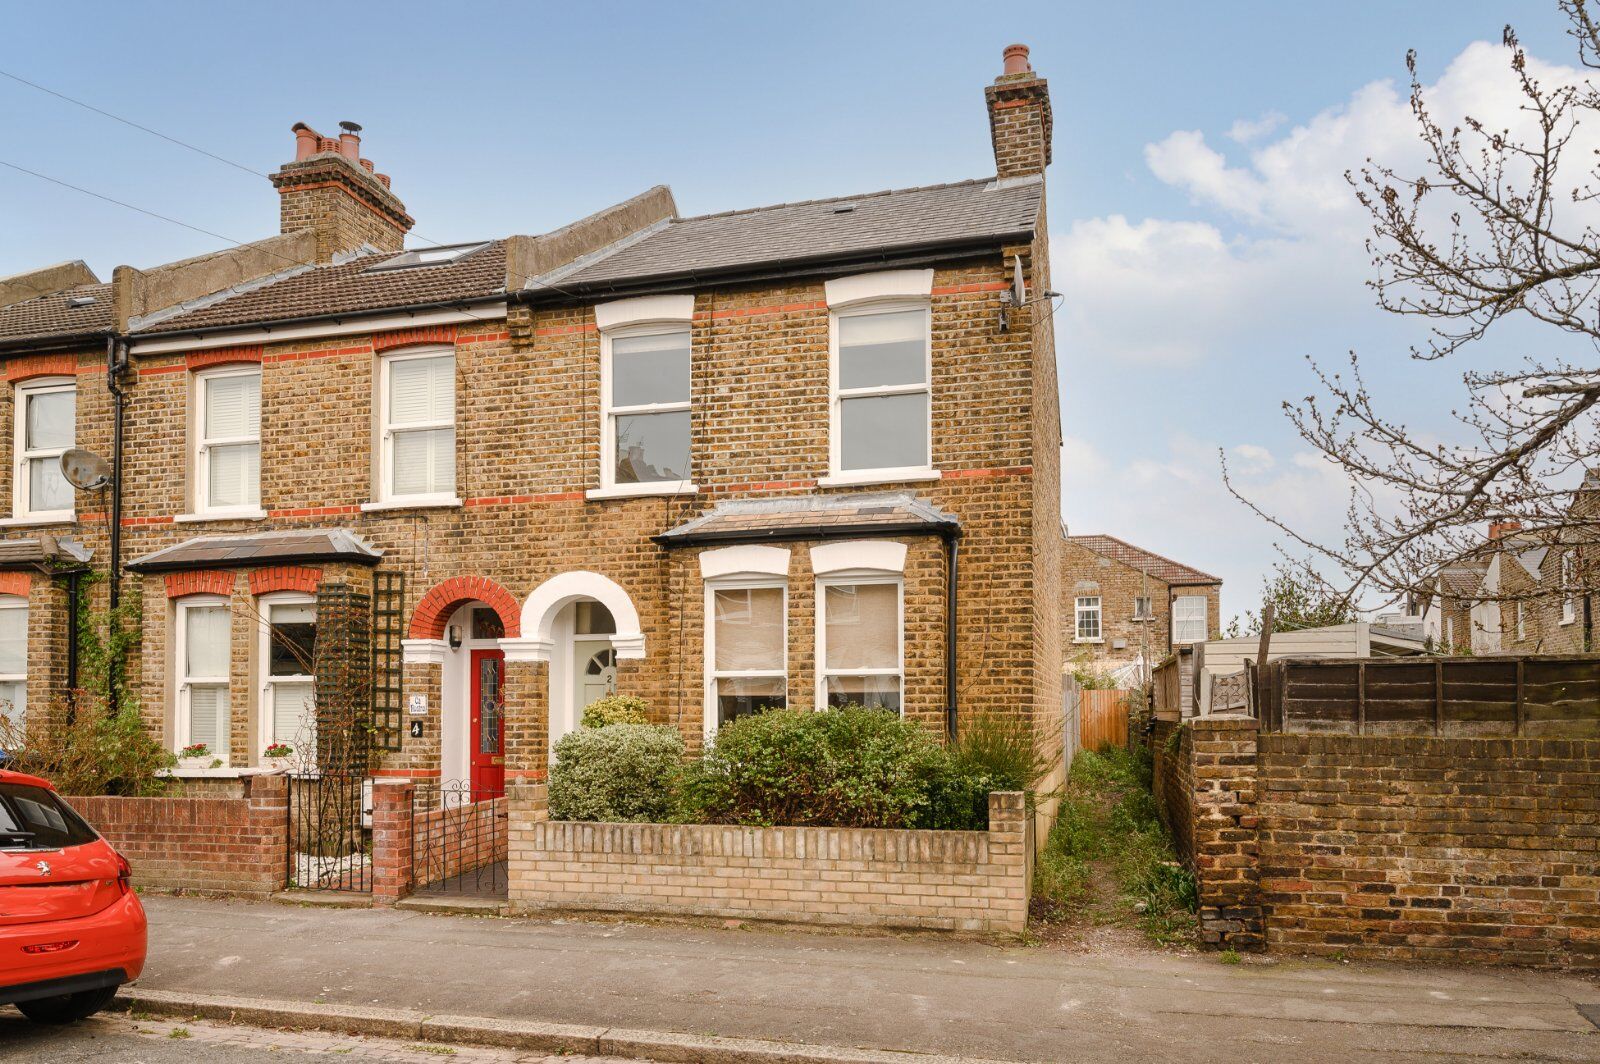 2 bedroom end terraced house for sale William Road, Wimbledon, SW19, main image